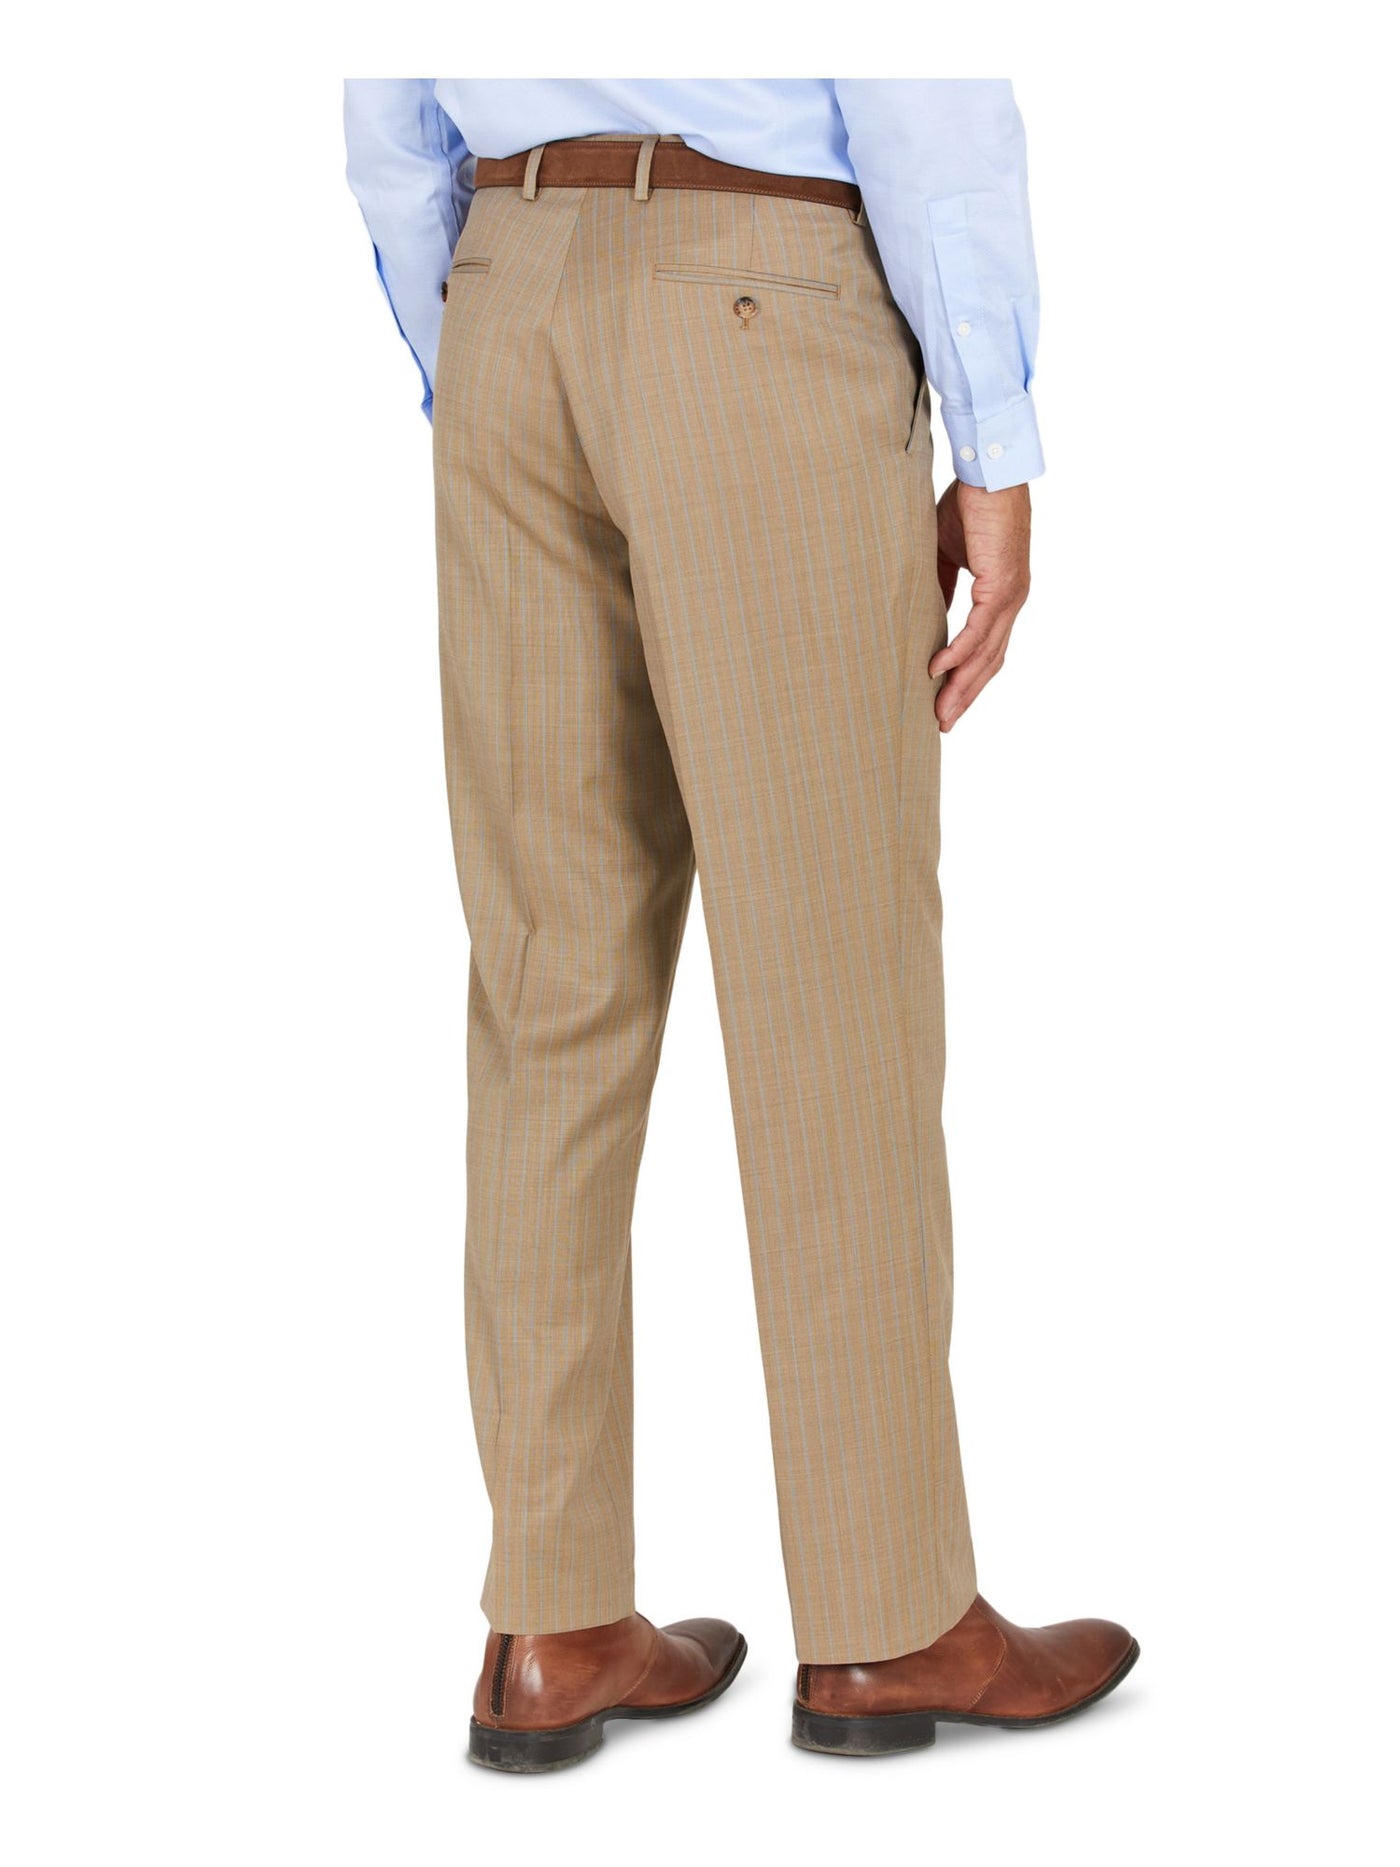 TAYION BY MONTEE HOLLAND Mens Beige Pleated, Striped Classic Fit Suit Separate Pants 30 X 32